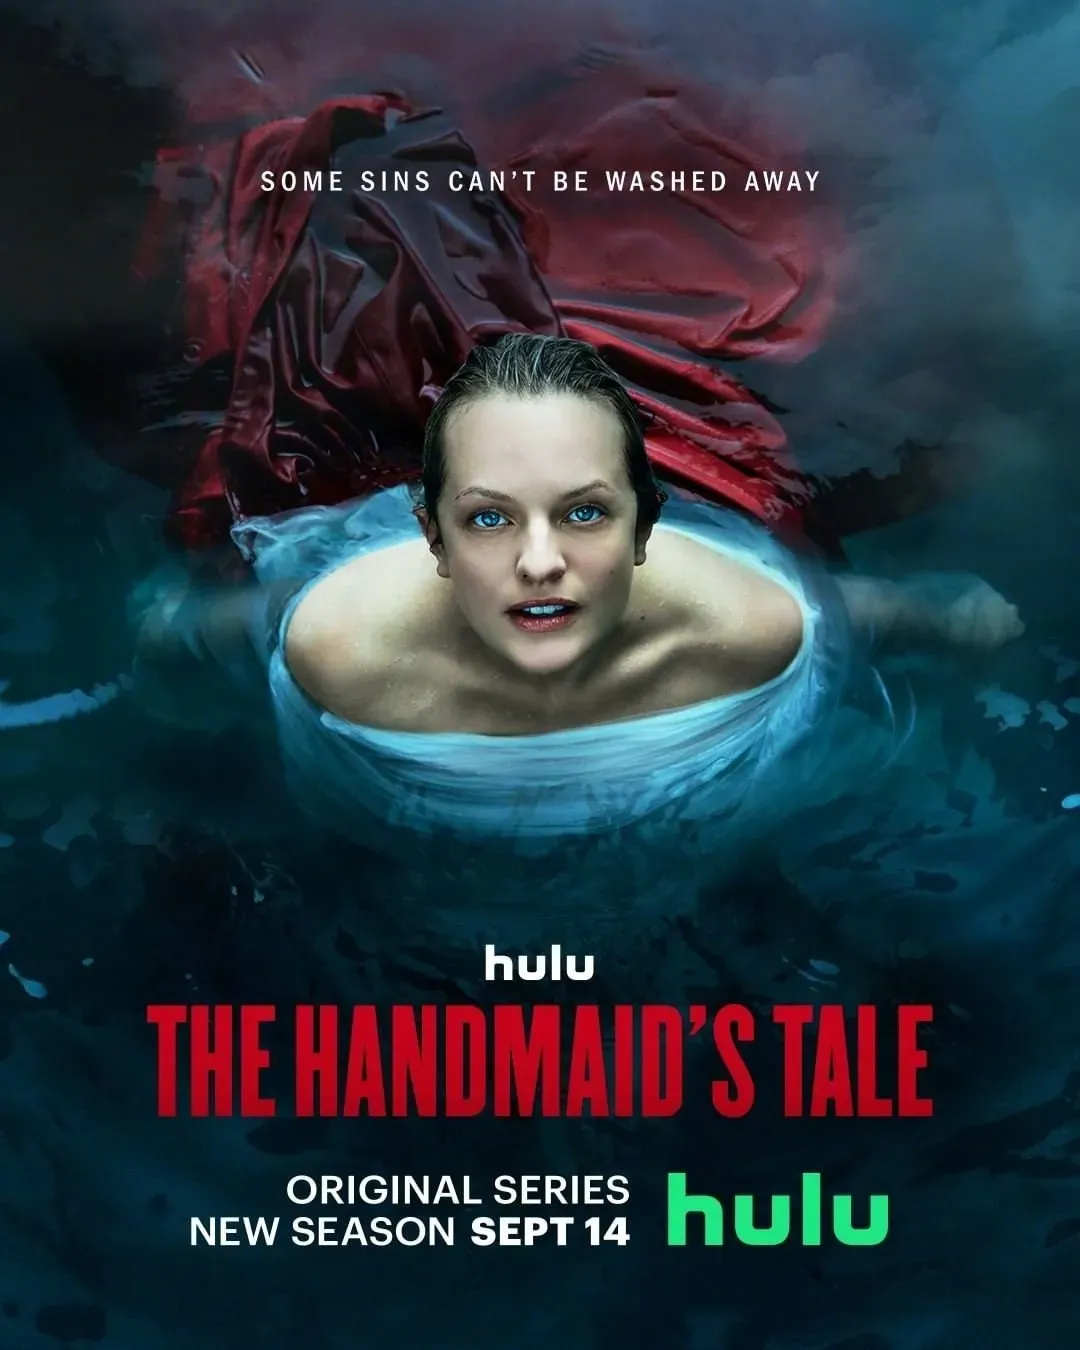 'The Handmaid's Tale Season 5' Official Trailer and Poster Released | FMV6